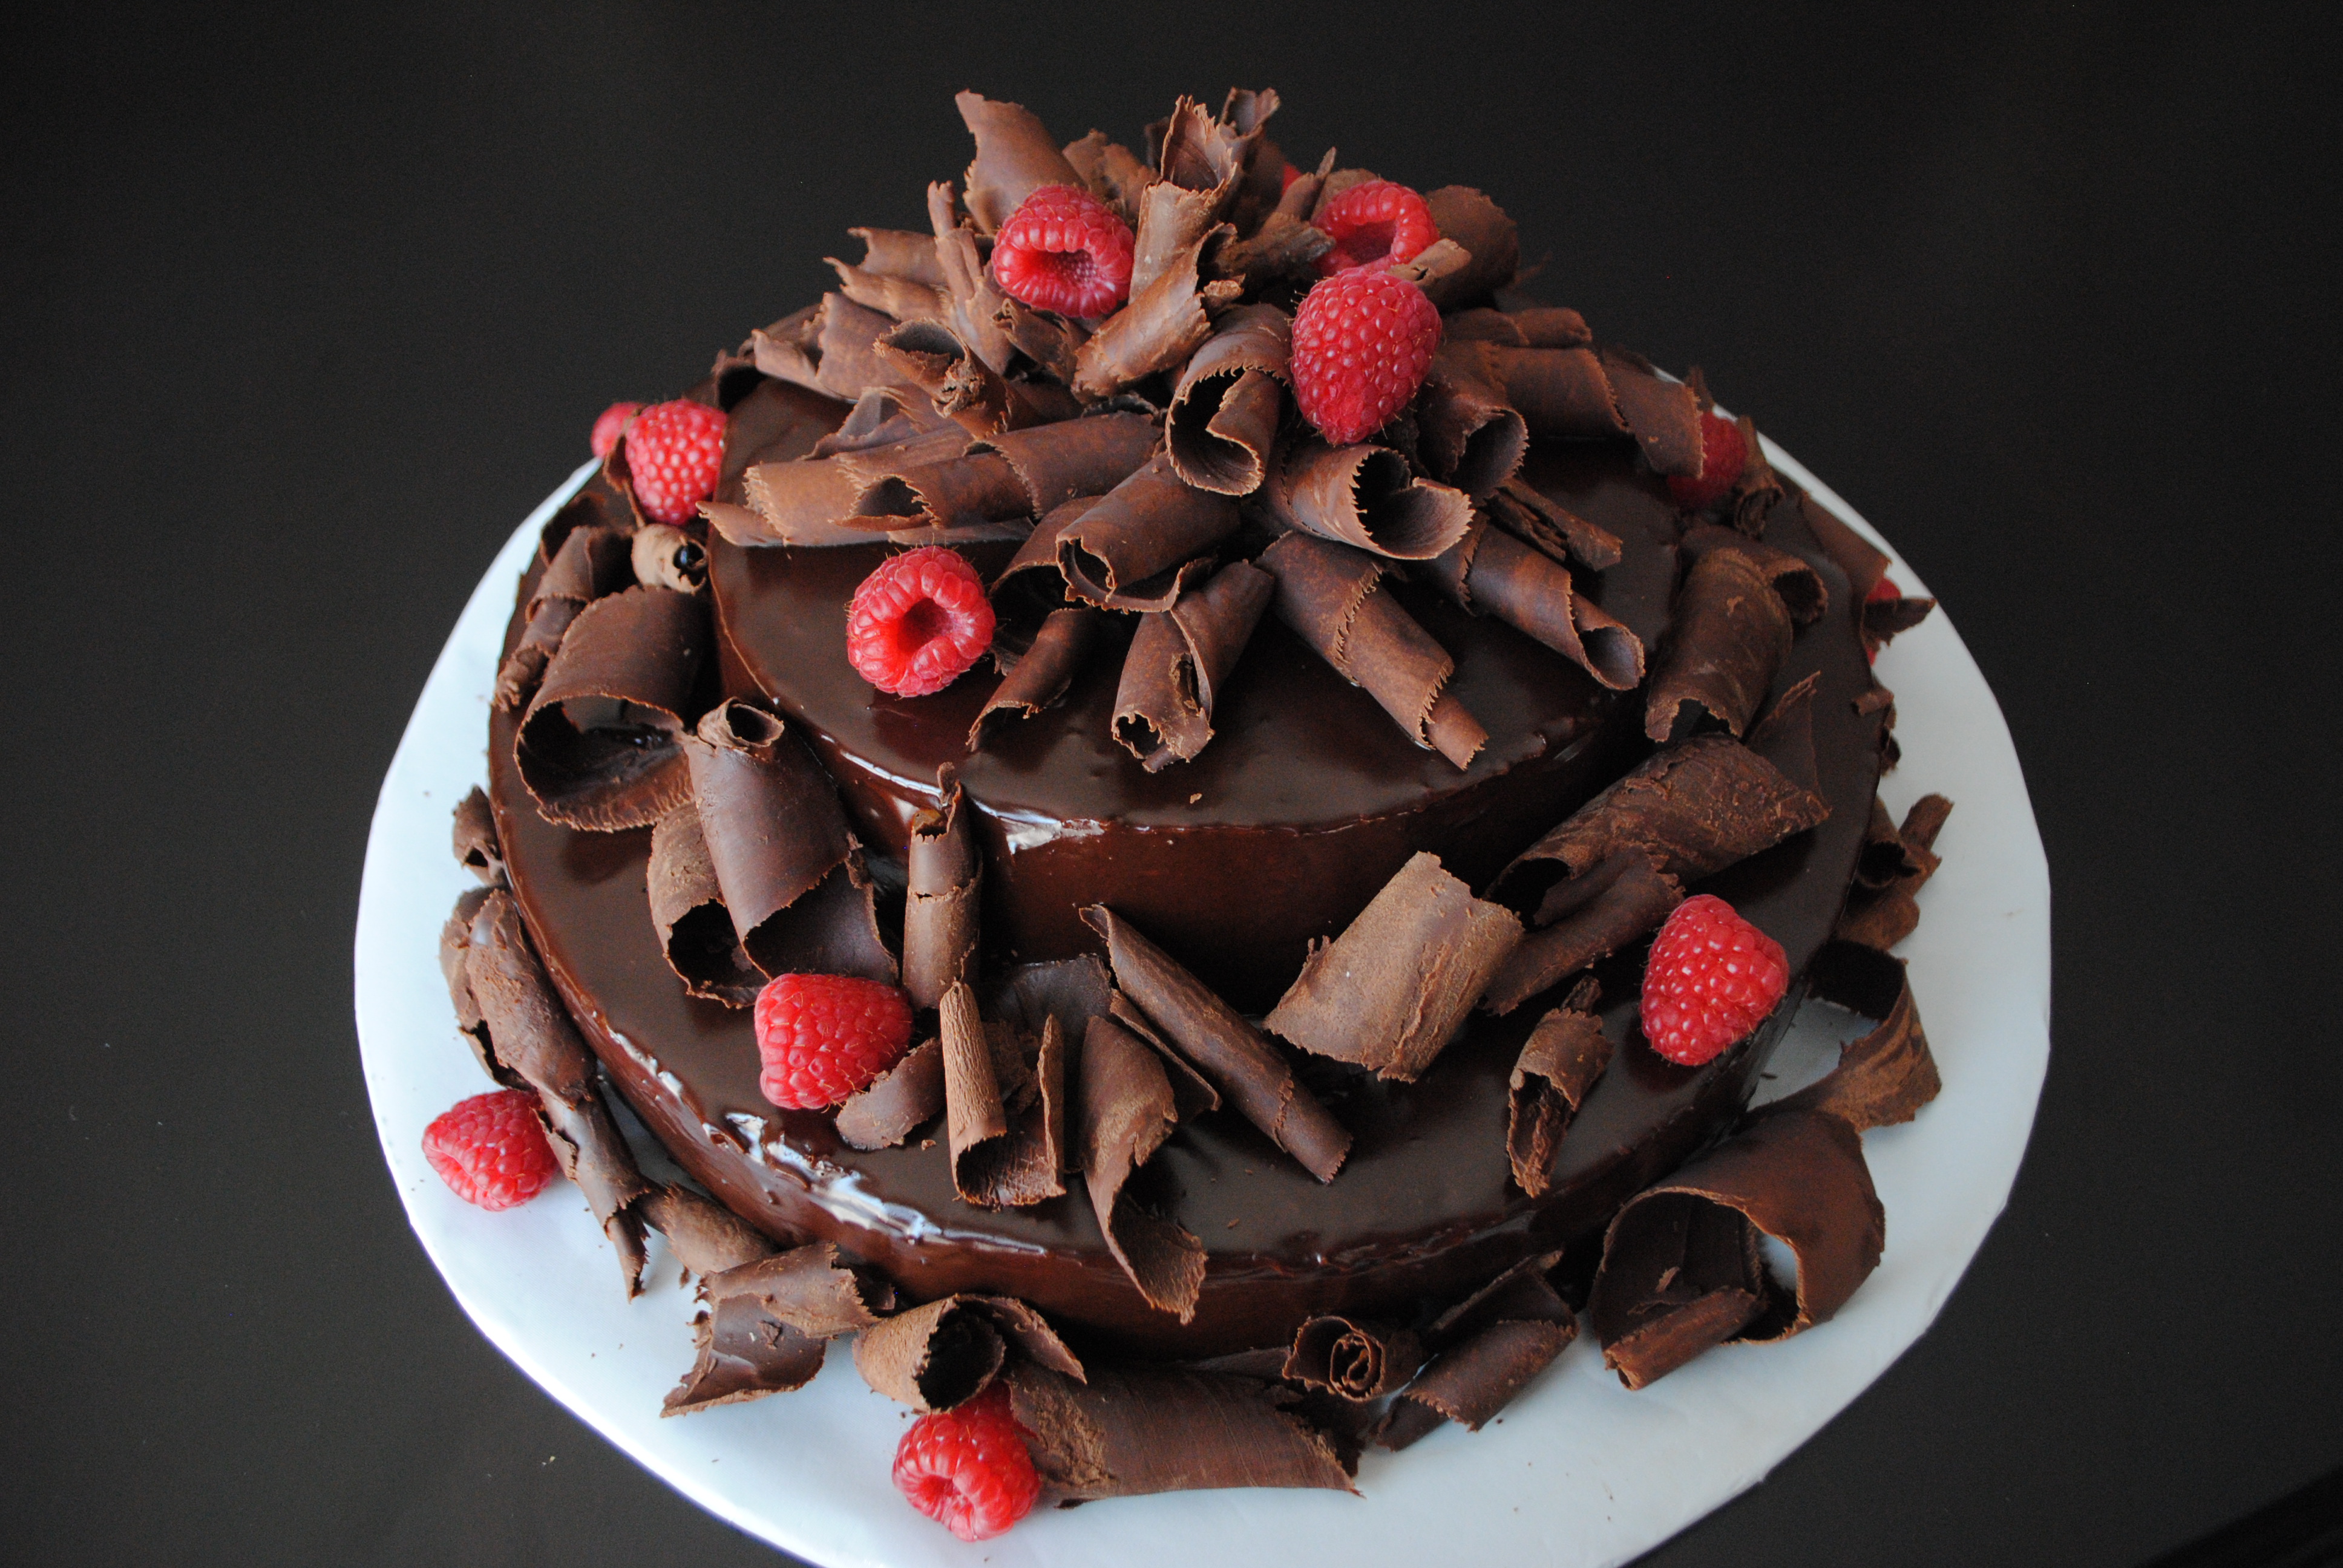 Chocolate Cake with Chocolate Curls and Raspberries | Dancing in ...